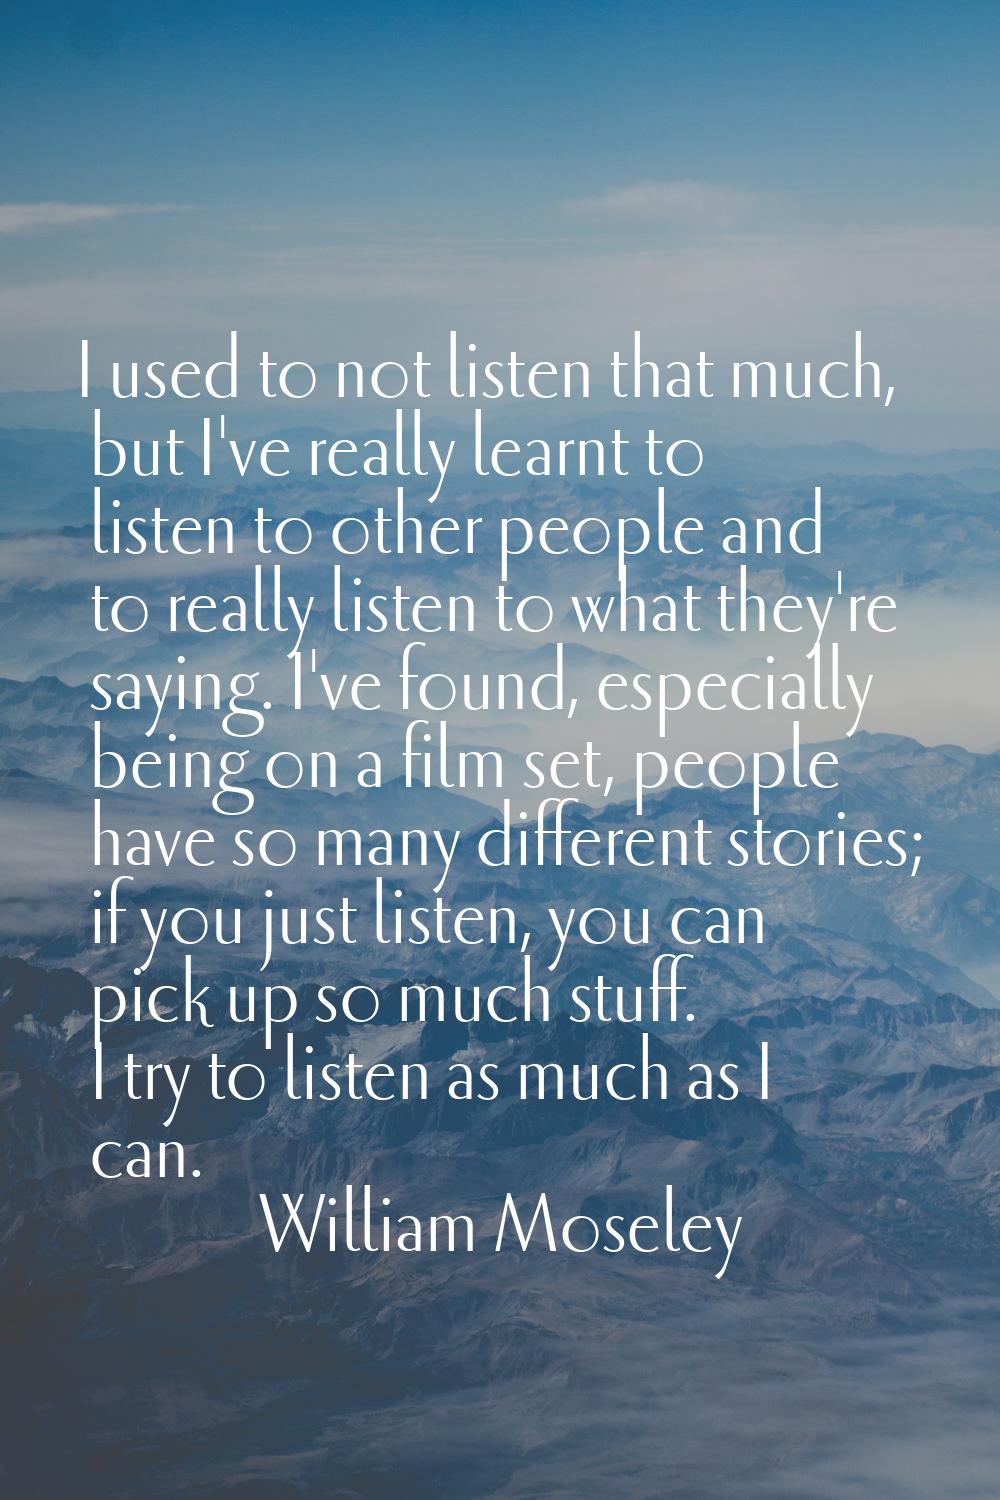 I used to not listen that much, but I've really learnt to listen to other people and to really list